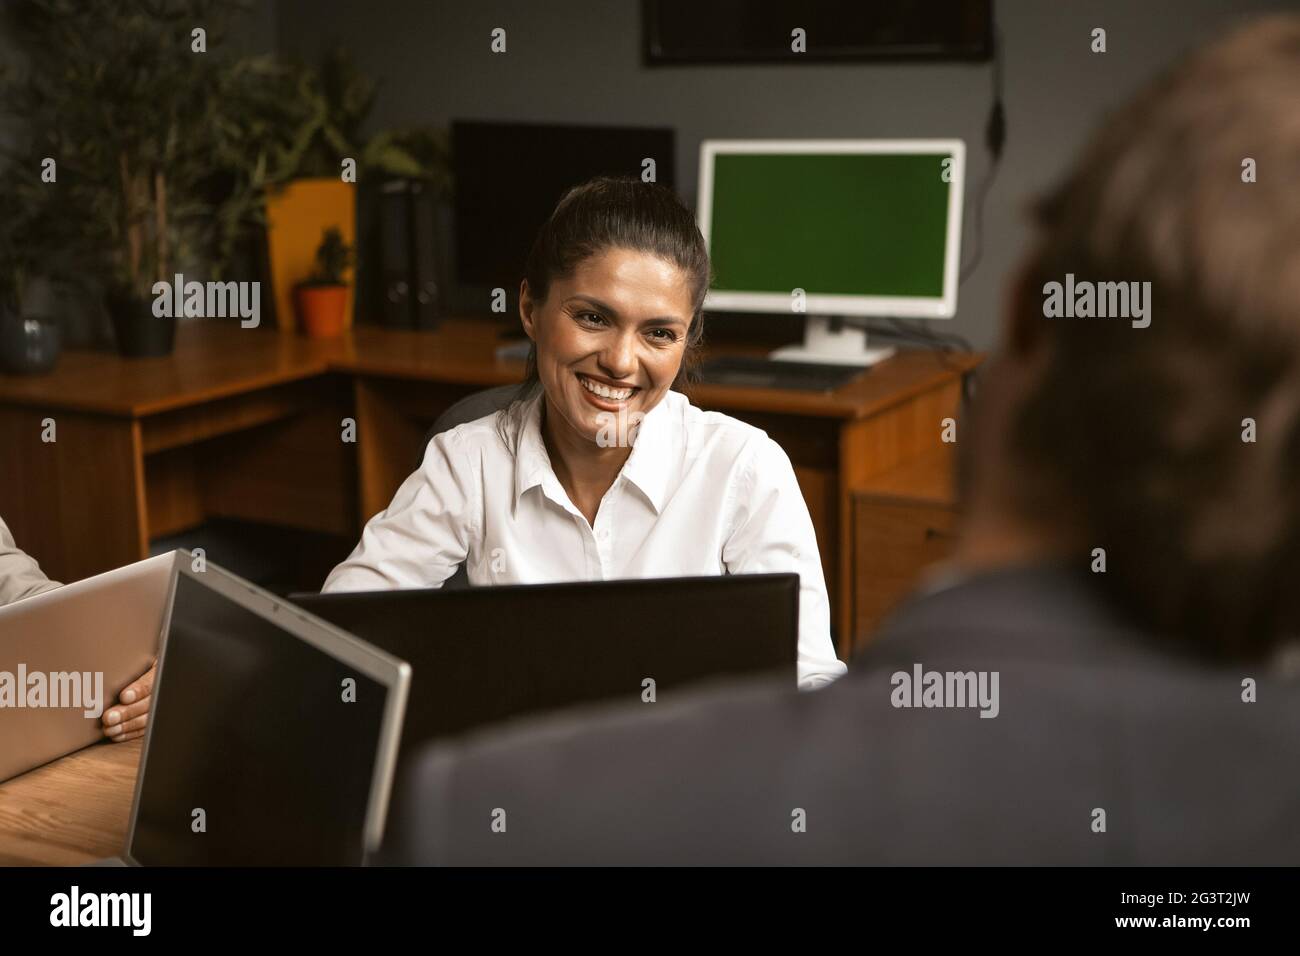 Smiling office worker, young woman in white shirt at interview. Stock Photo